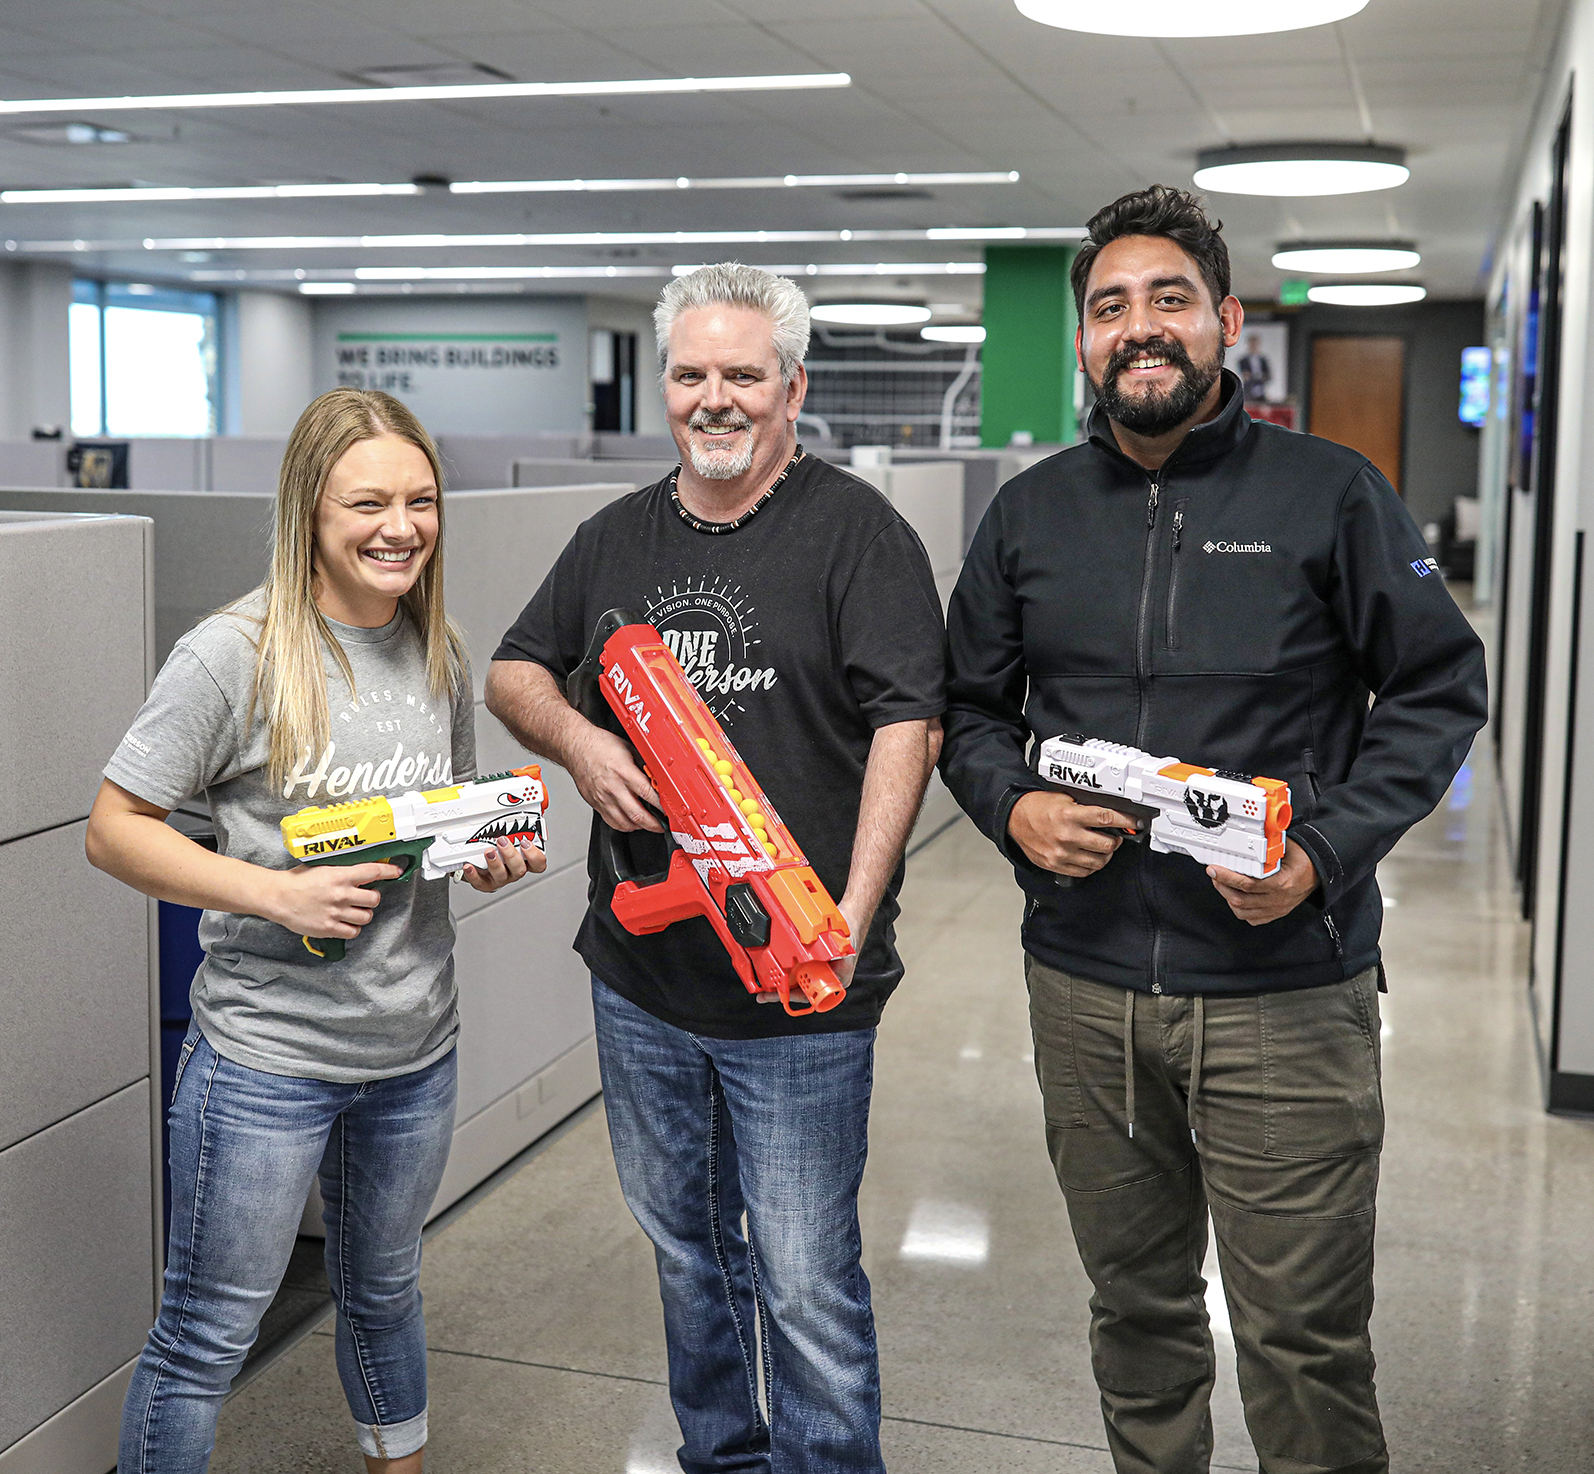 Three engineers holding nerf guns smiling for the camera in an office